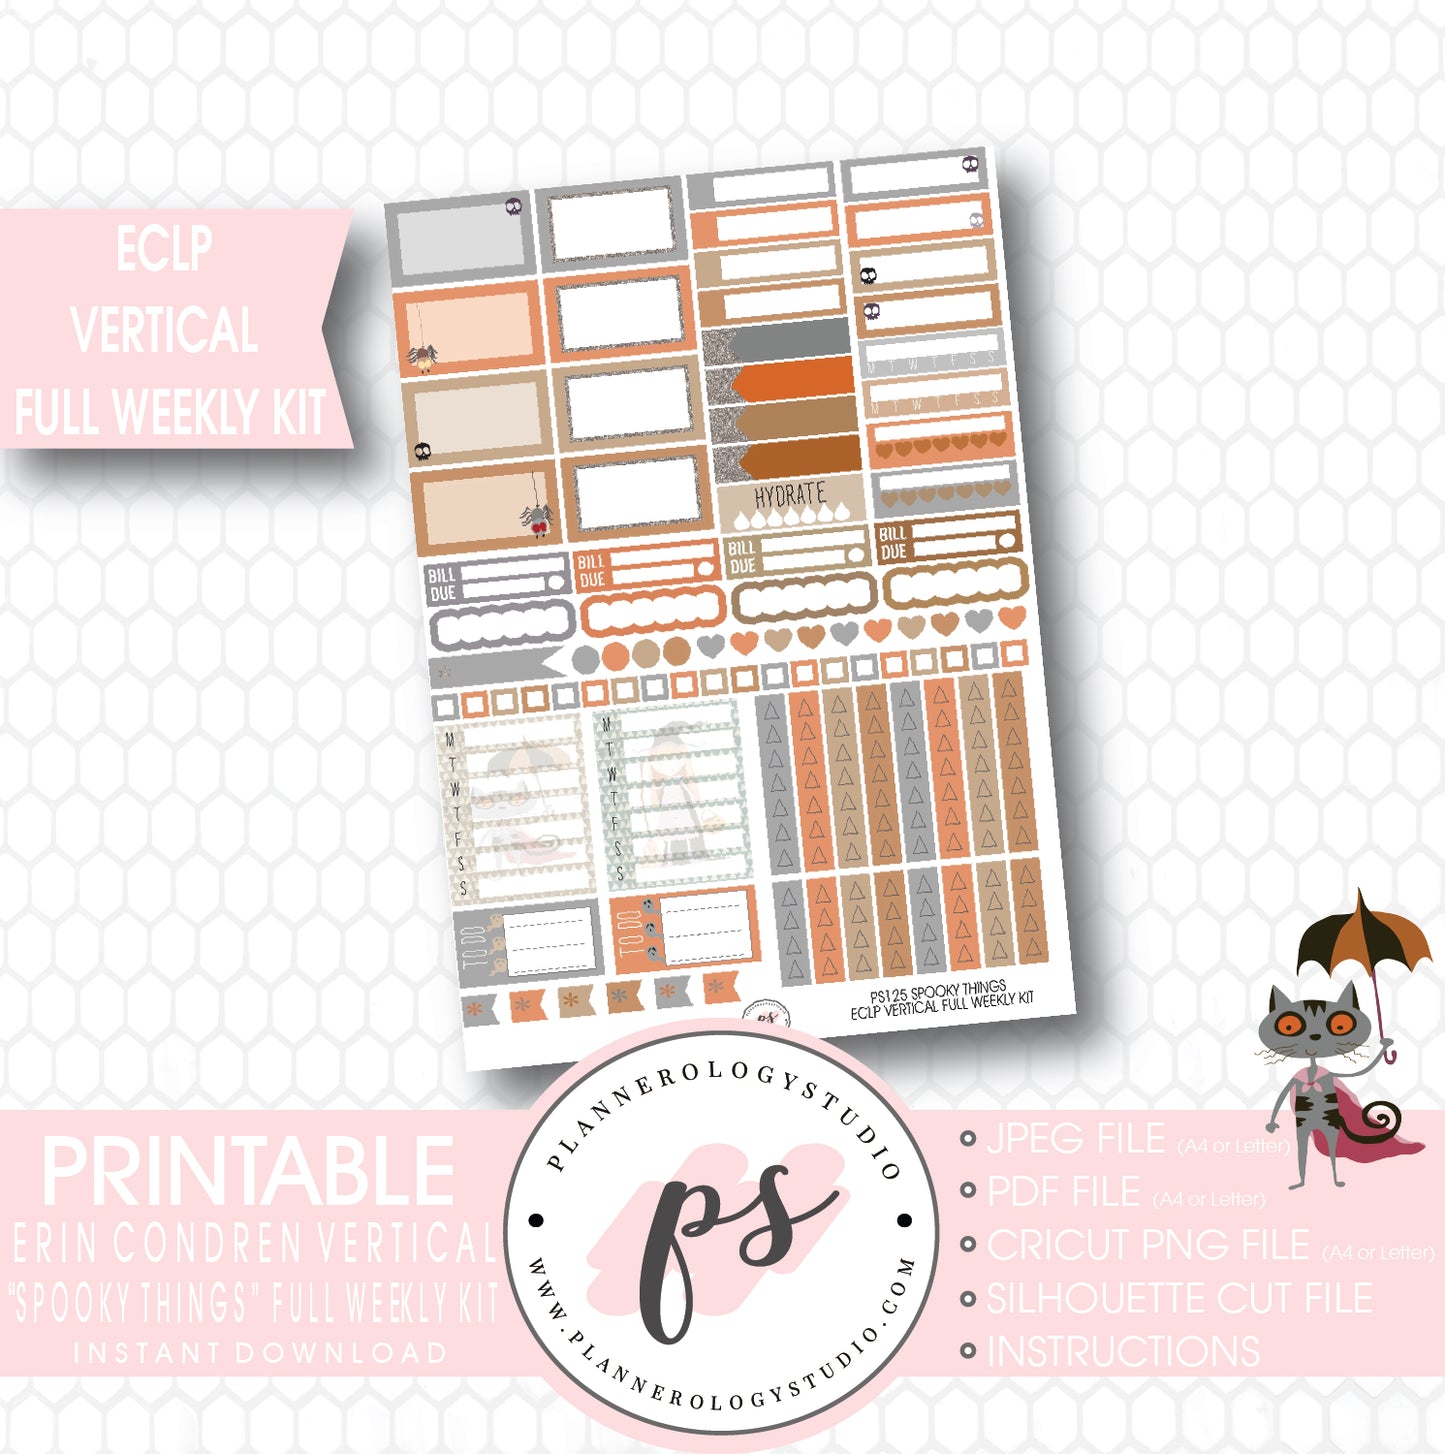 Spooky Things Full Weekly Kit Printable Planner Stickers (for use with ECLP Vertical) - Plannerologystudio